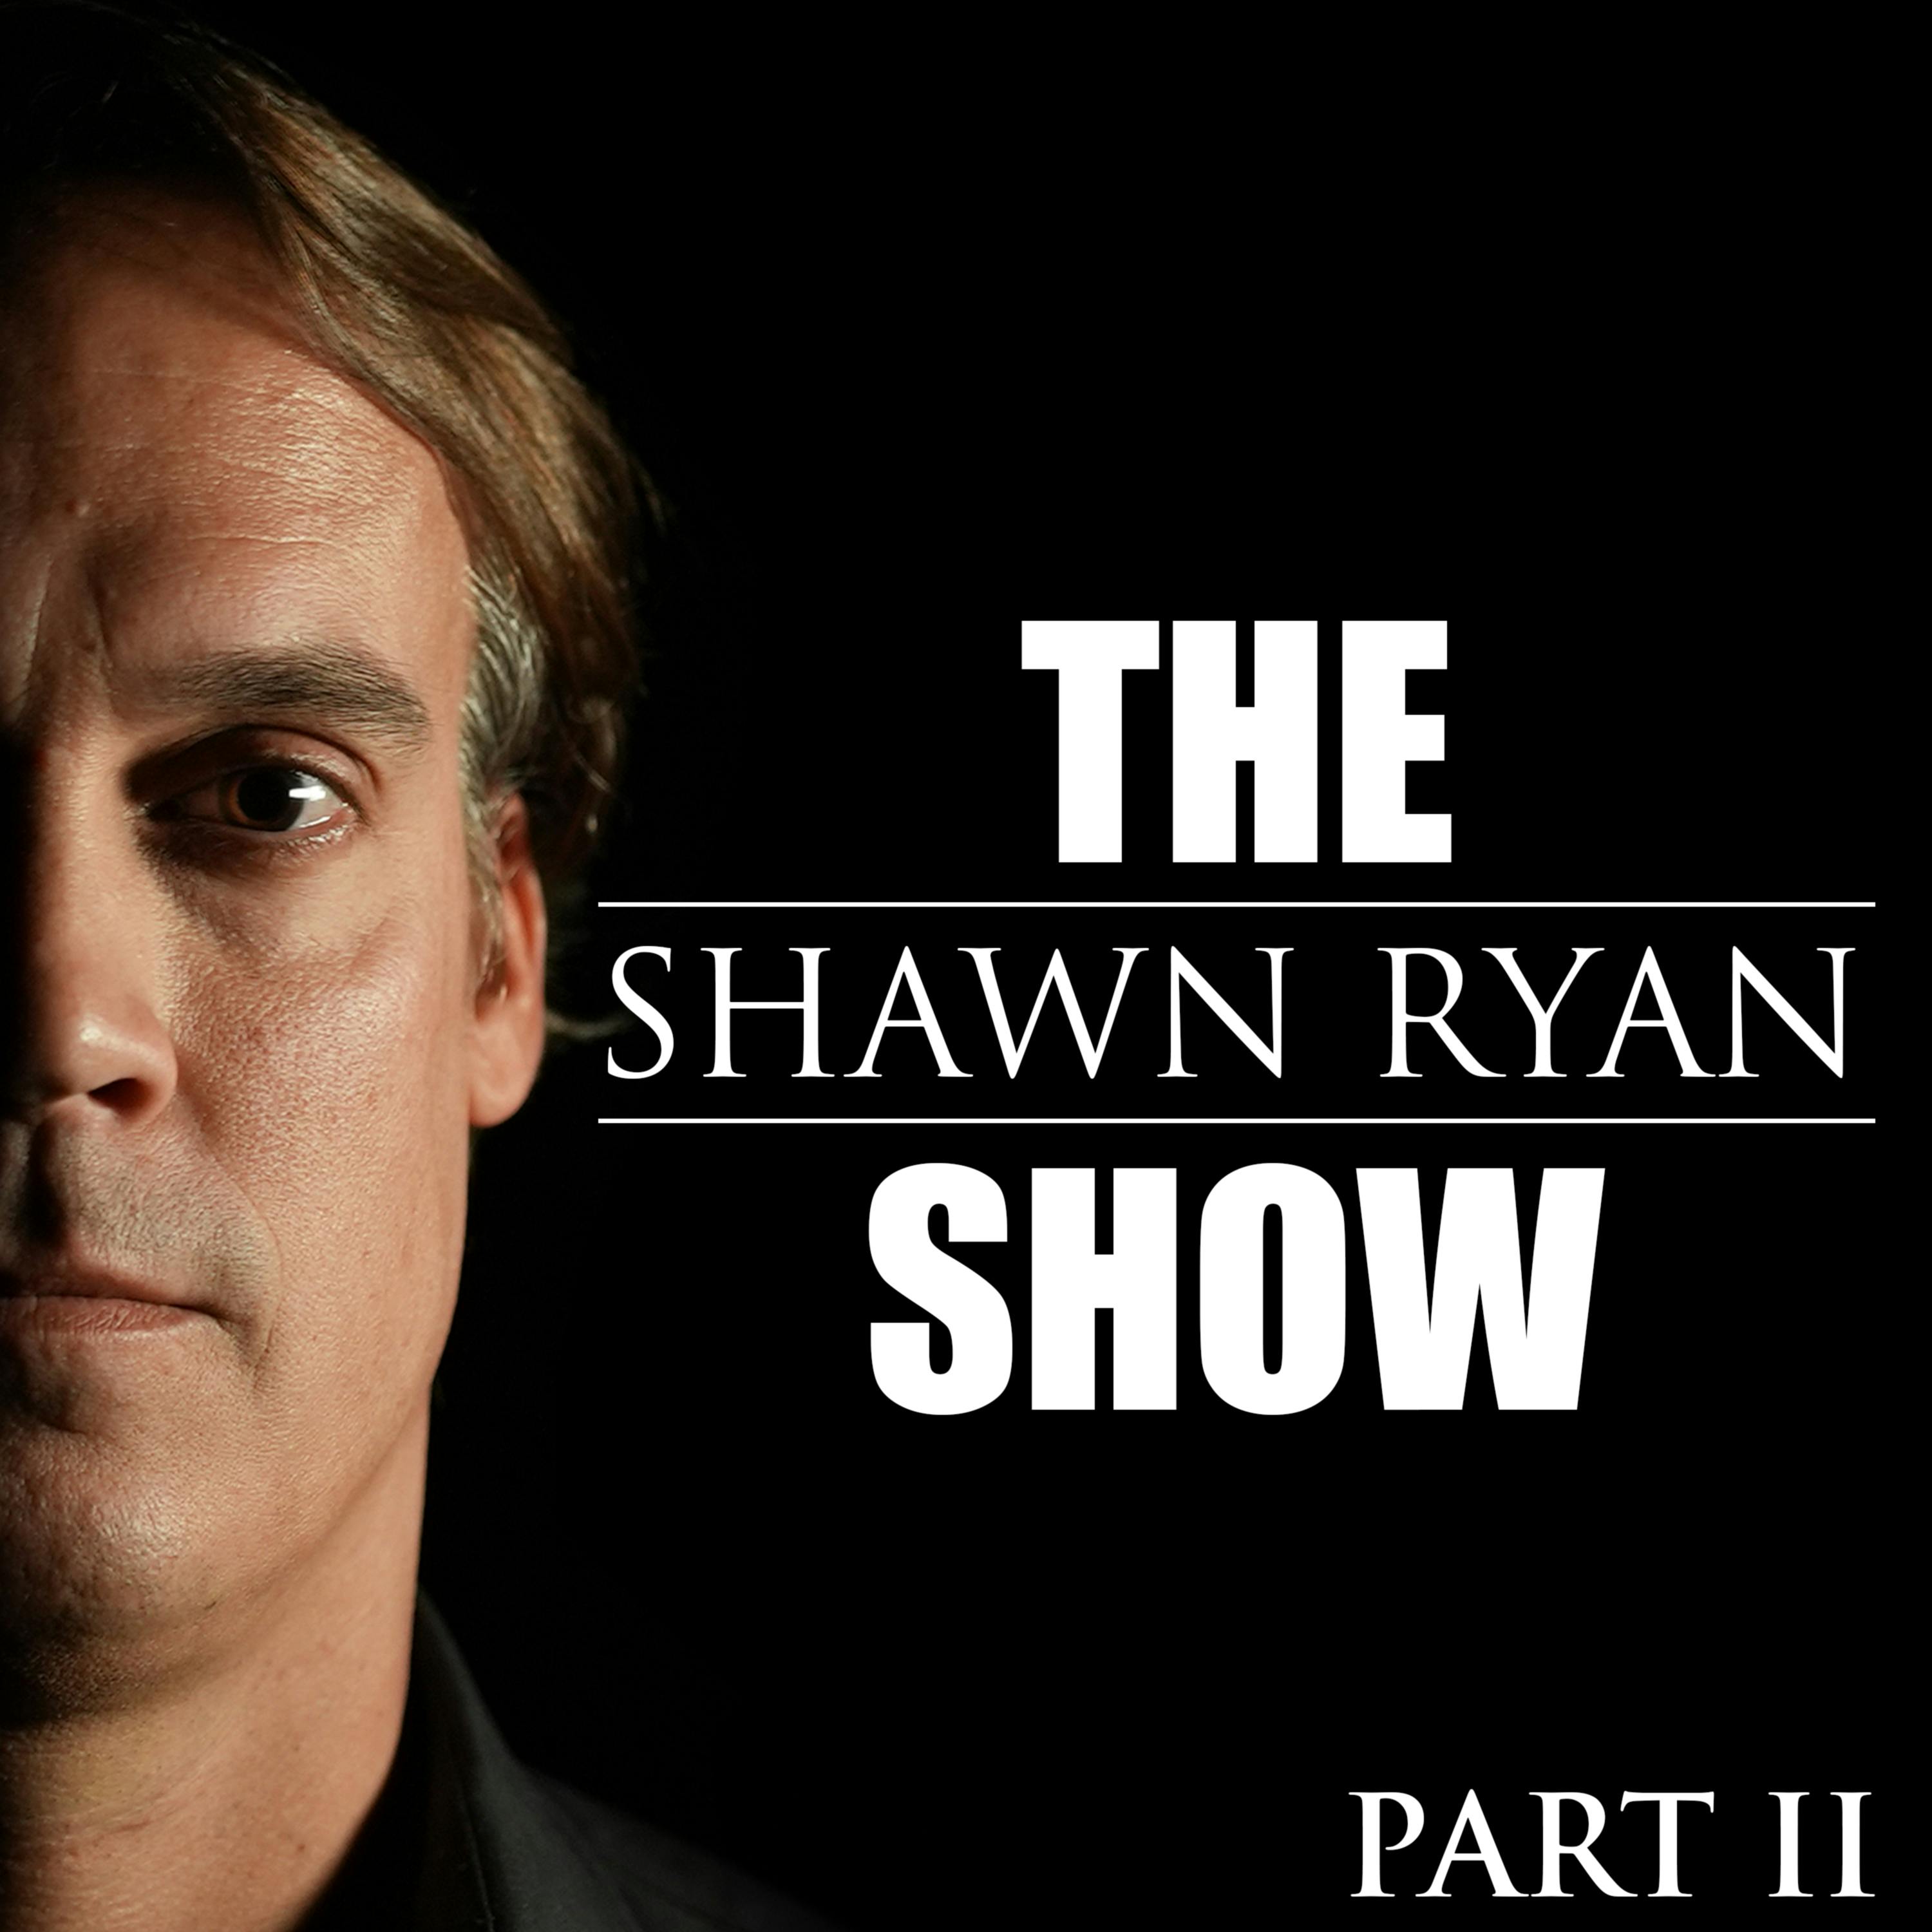 #51 Chris VanSant - Delta Force Operator / Killing Off the "Deck of Cards" & Capturing Saddam Hussein  | Part 2 by Shawn Ryan | Cumulus Podcast Network